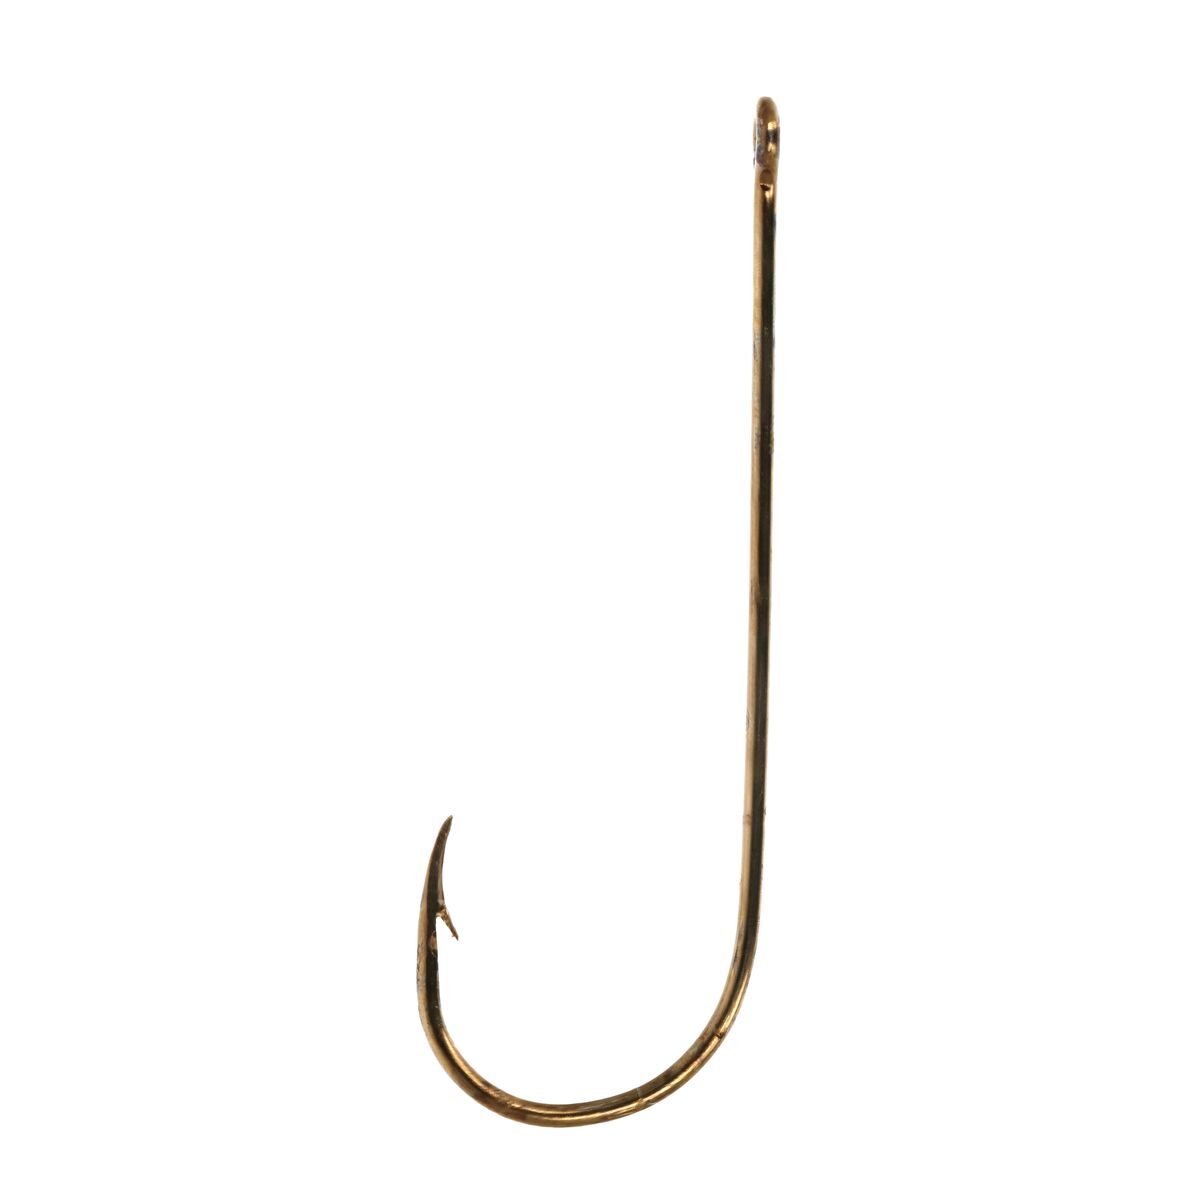 Eagle Claw Forged Light Wire Aberdeen Fishing Hook Size 6